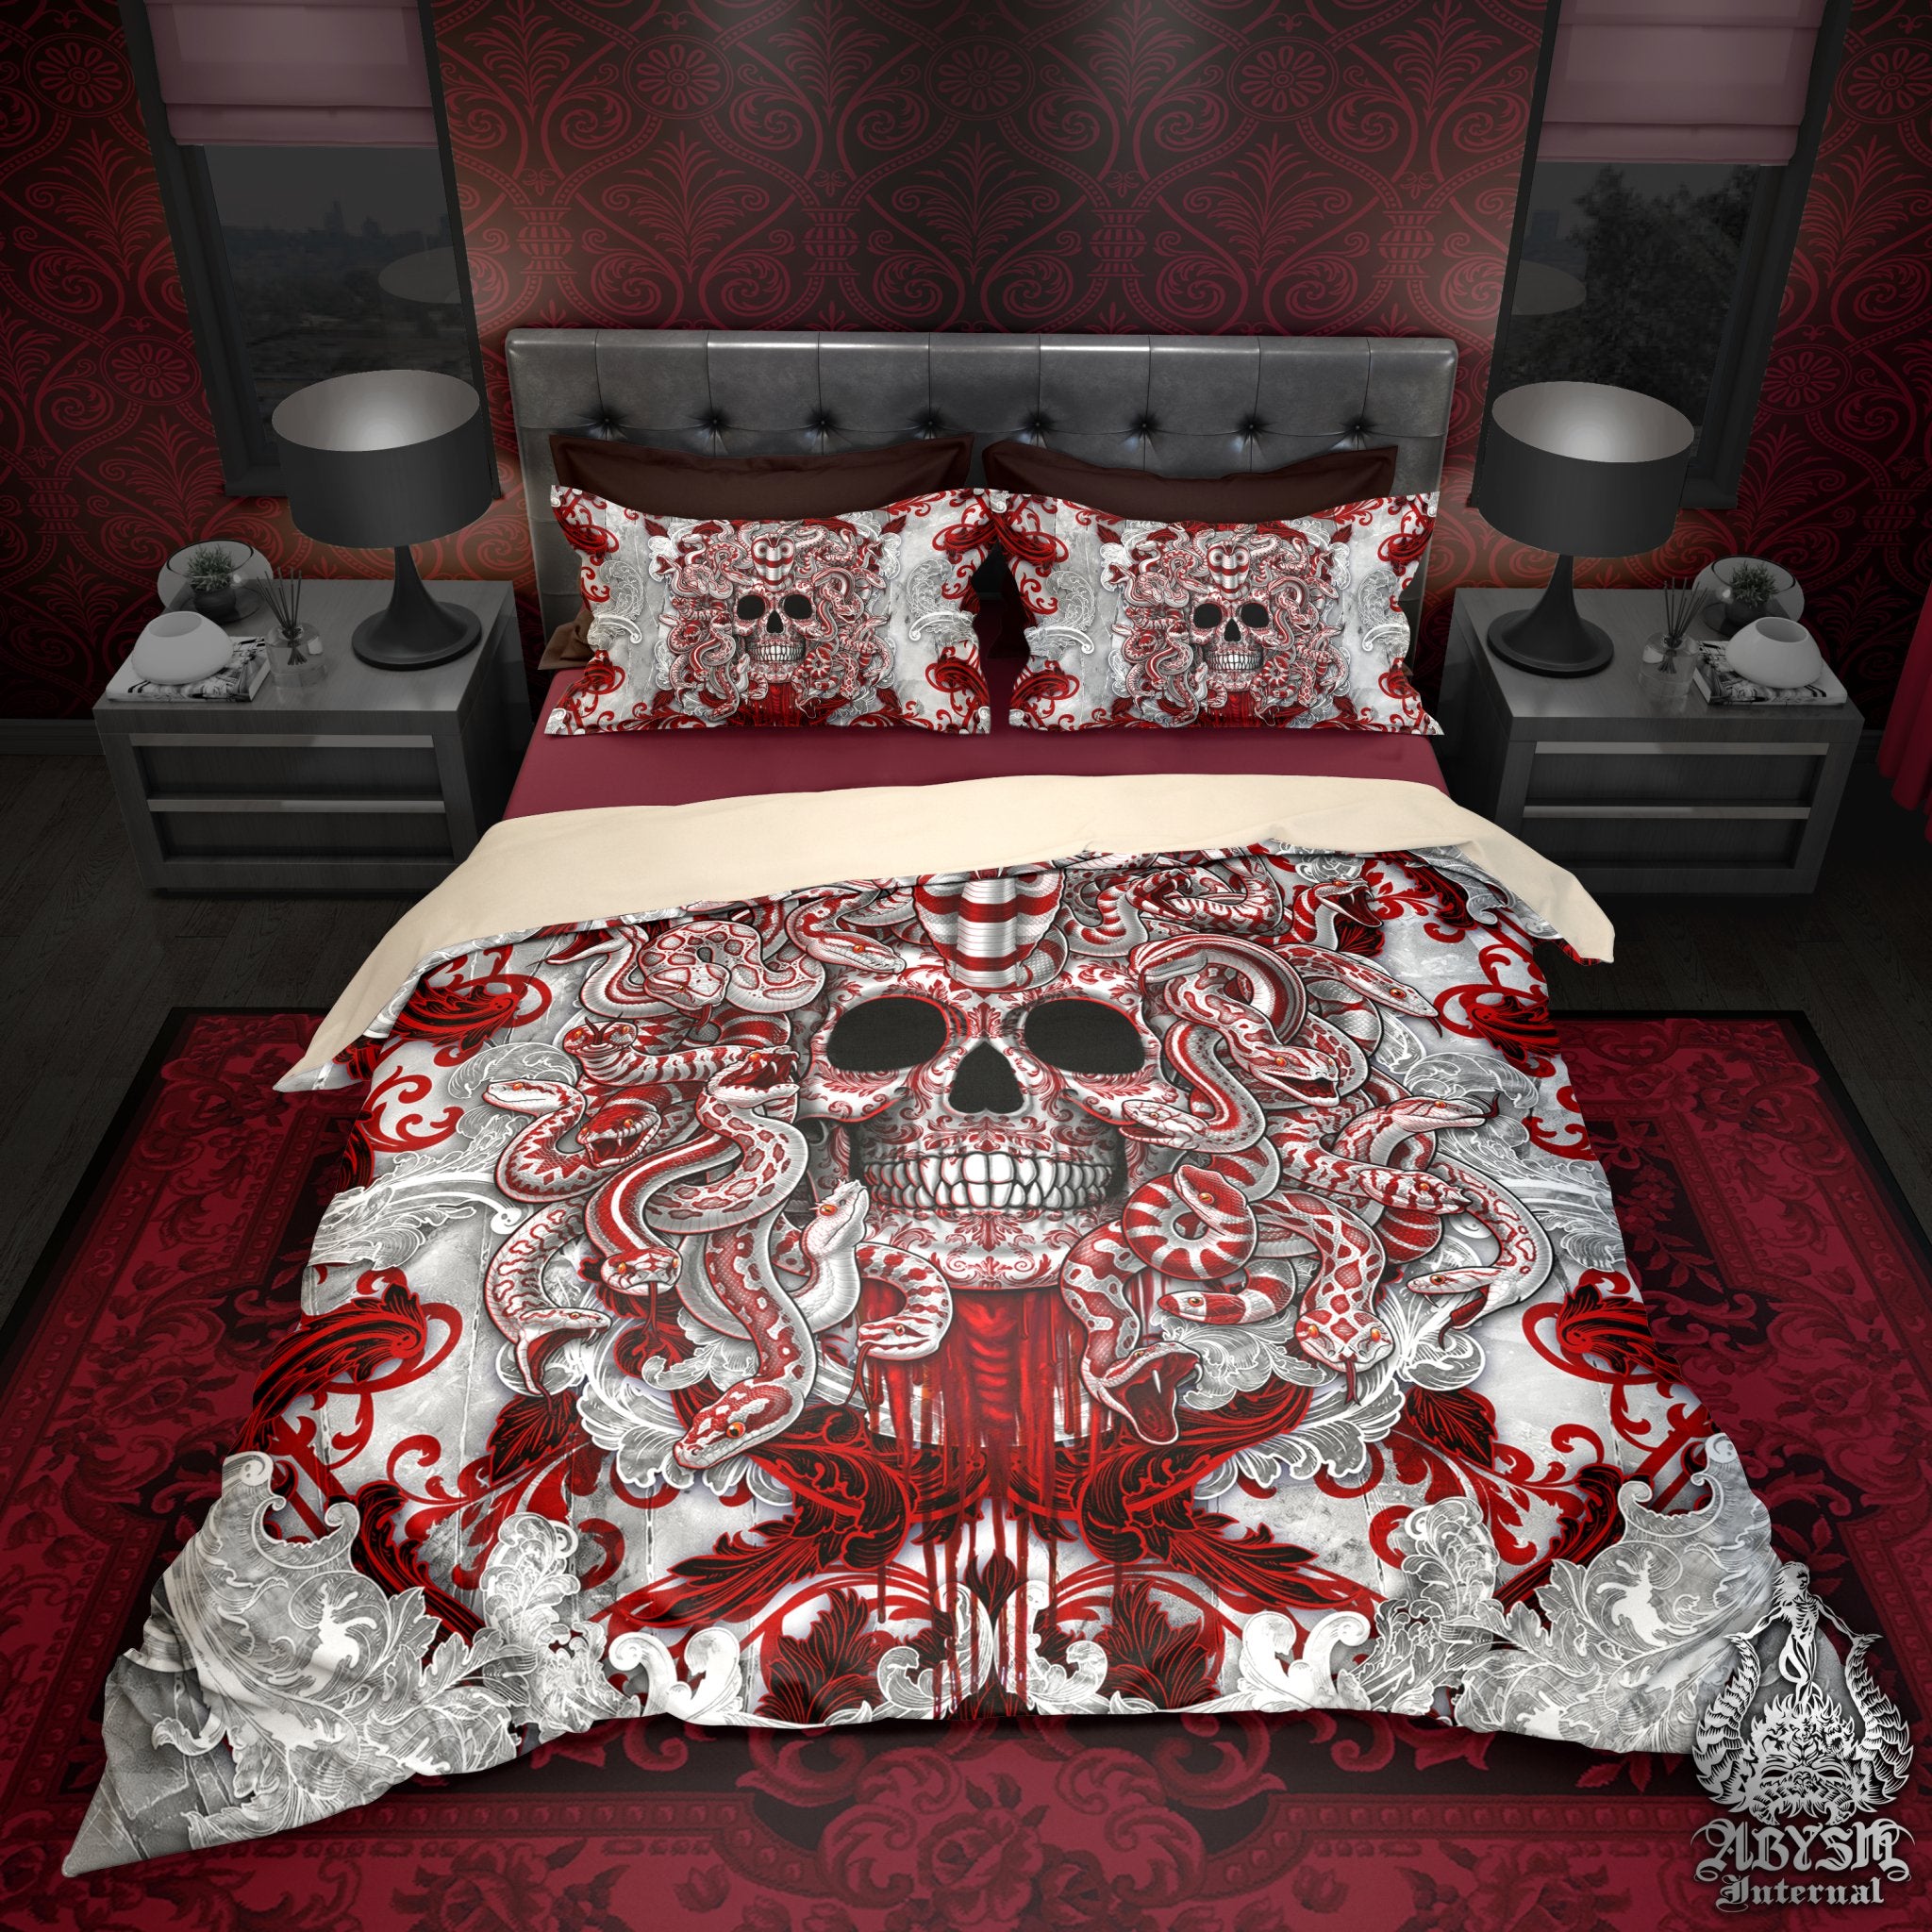 Gothic Bedding Set, Comforter or Duvet, White Goth Bed Cover, Bedroom Decor, Bloody Medusa Skull, King, Queen & Twin Size - 4 Faces - Abysm Internal